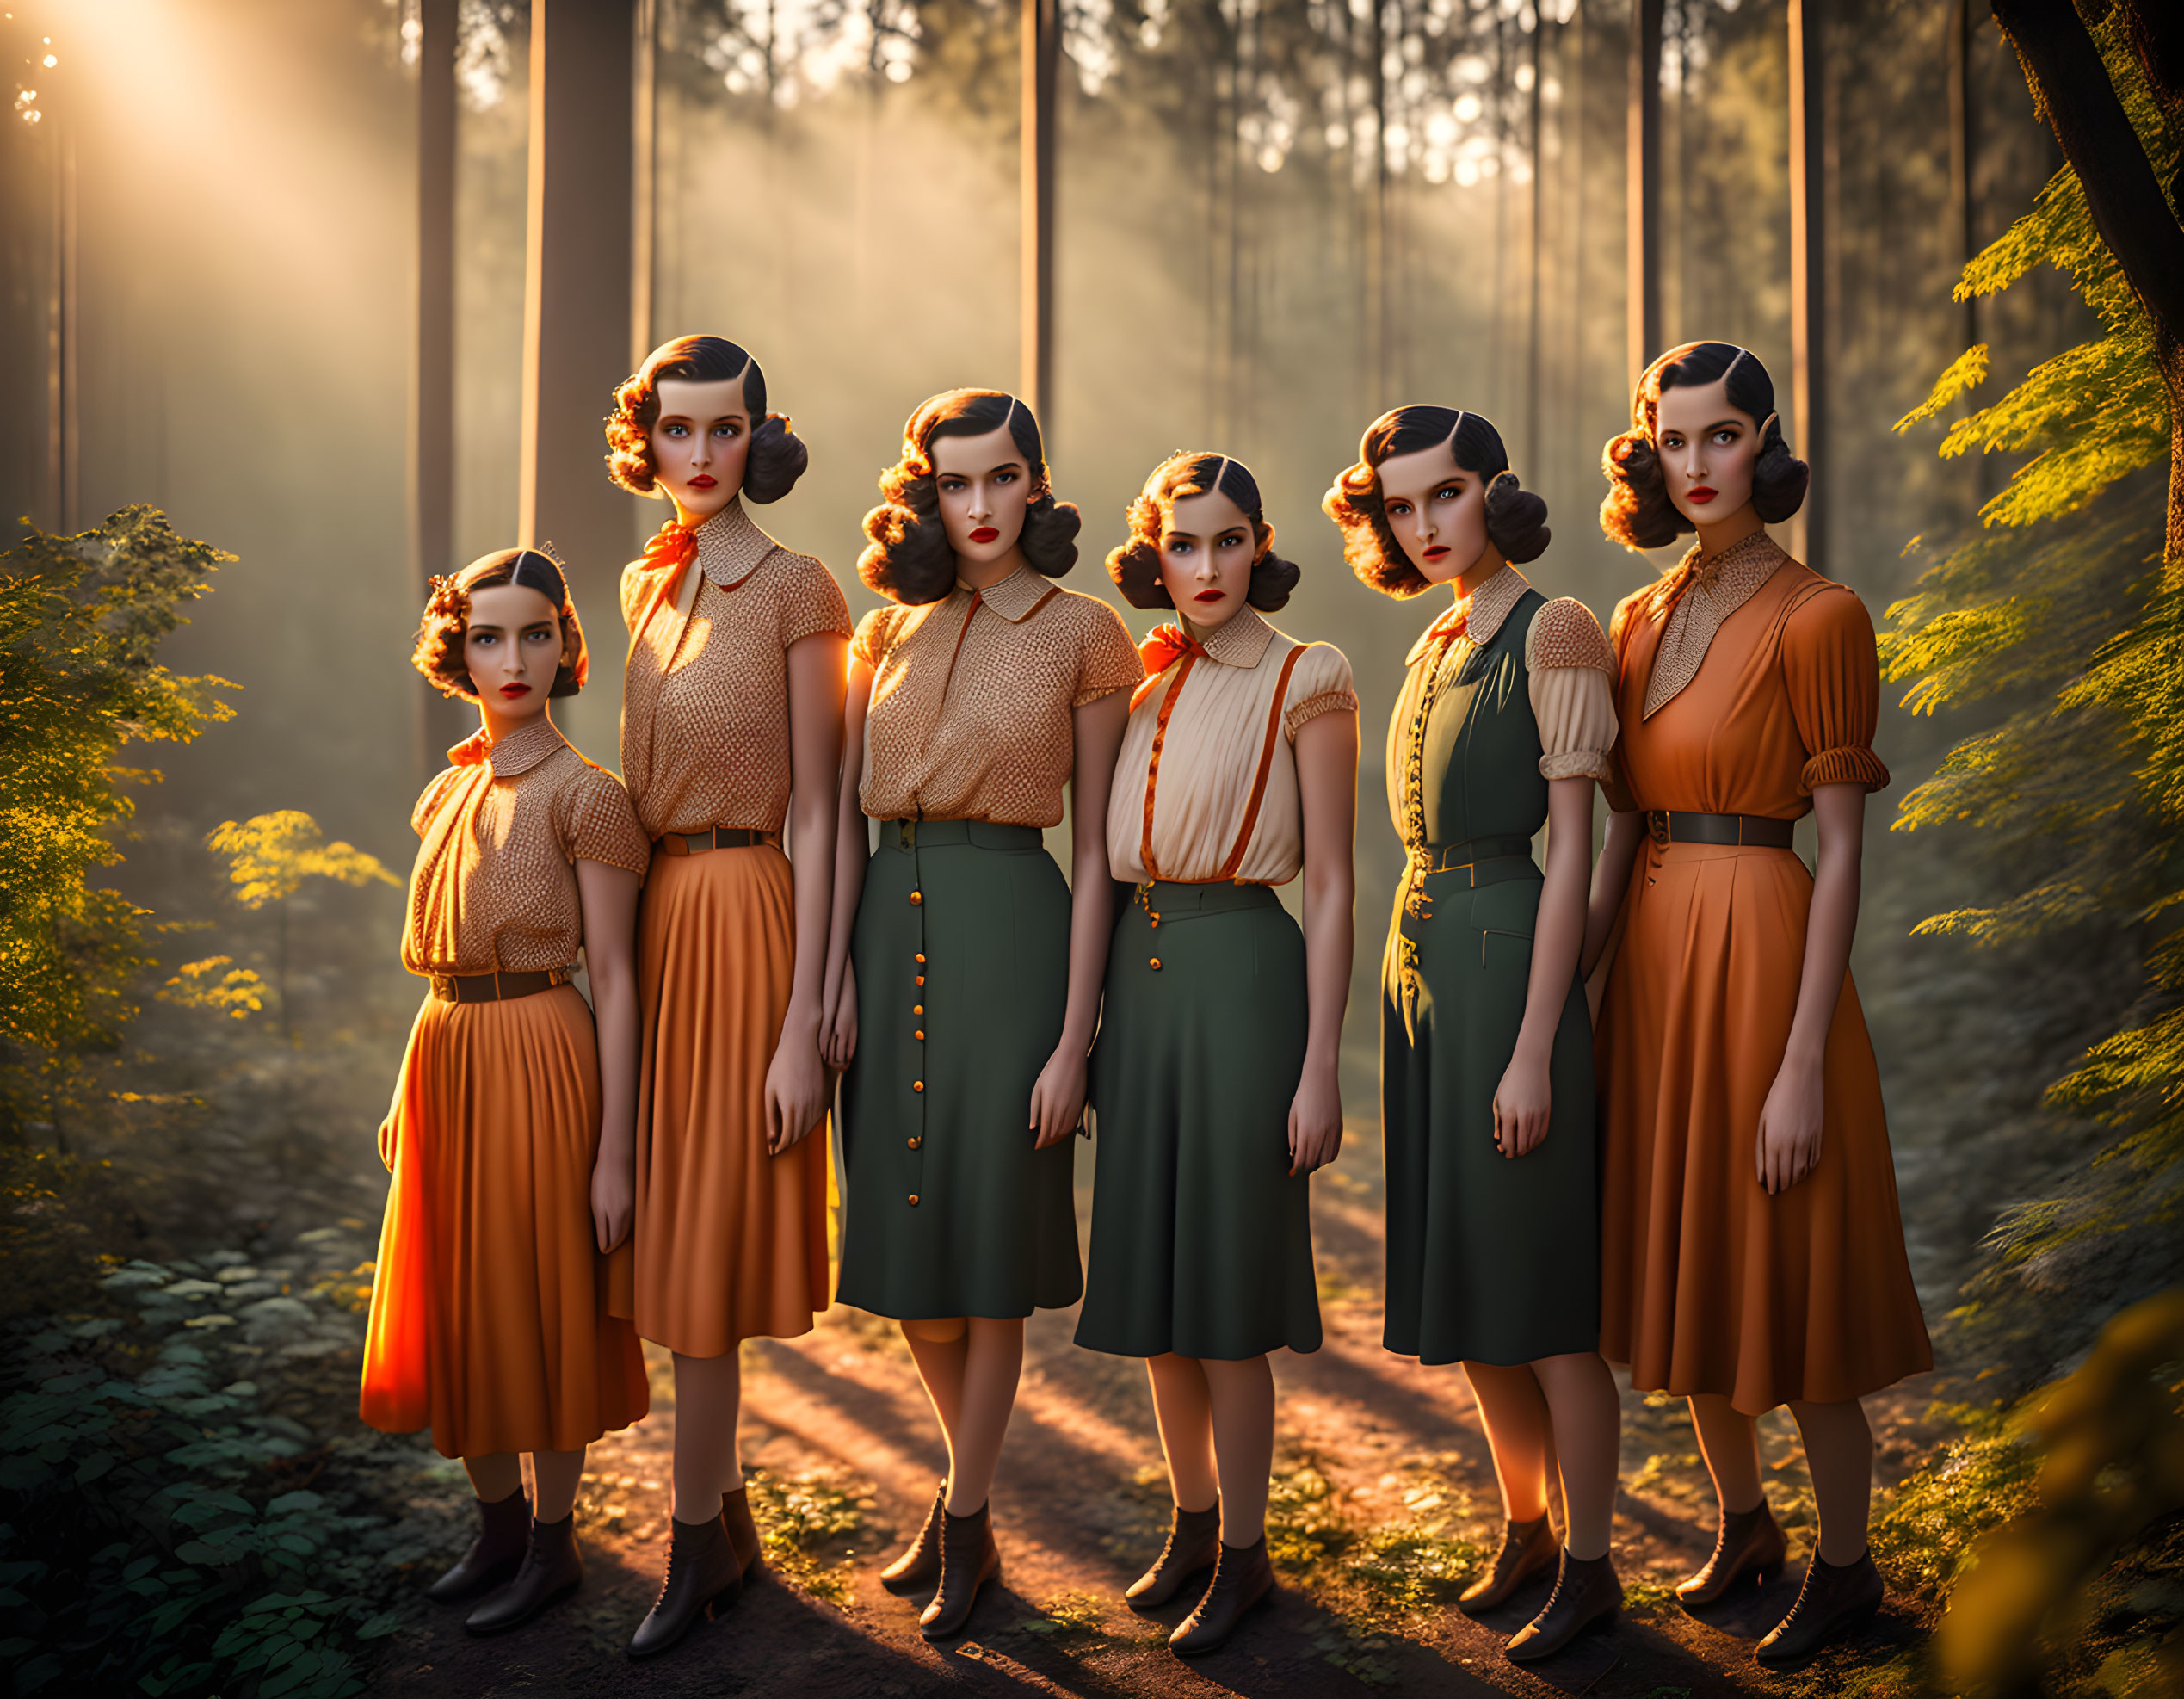 Six women in vintage clothing in forest with sunlight filtering through trees